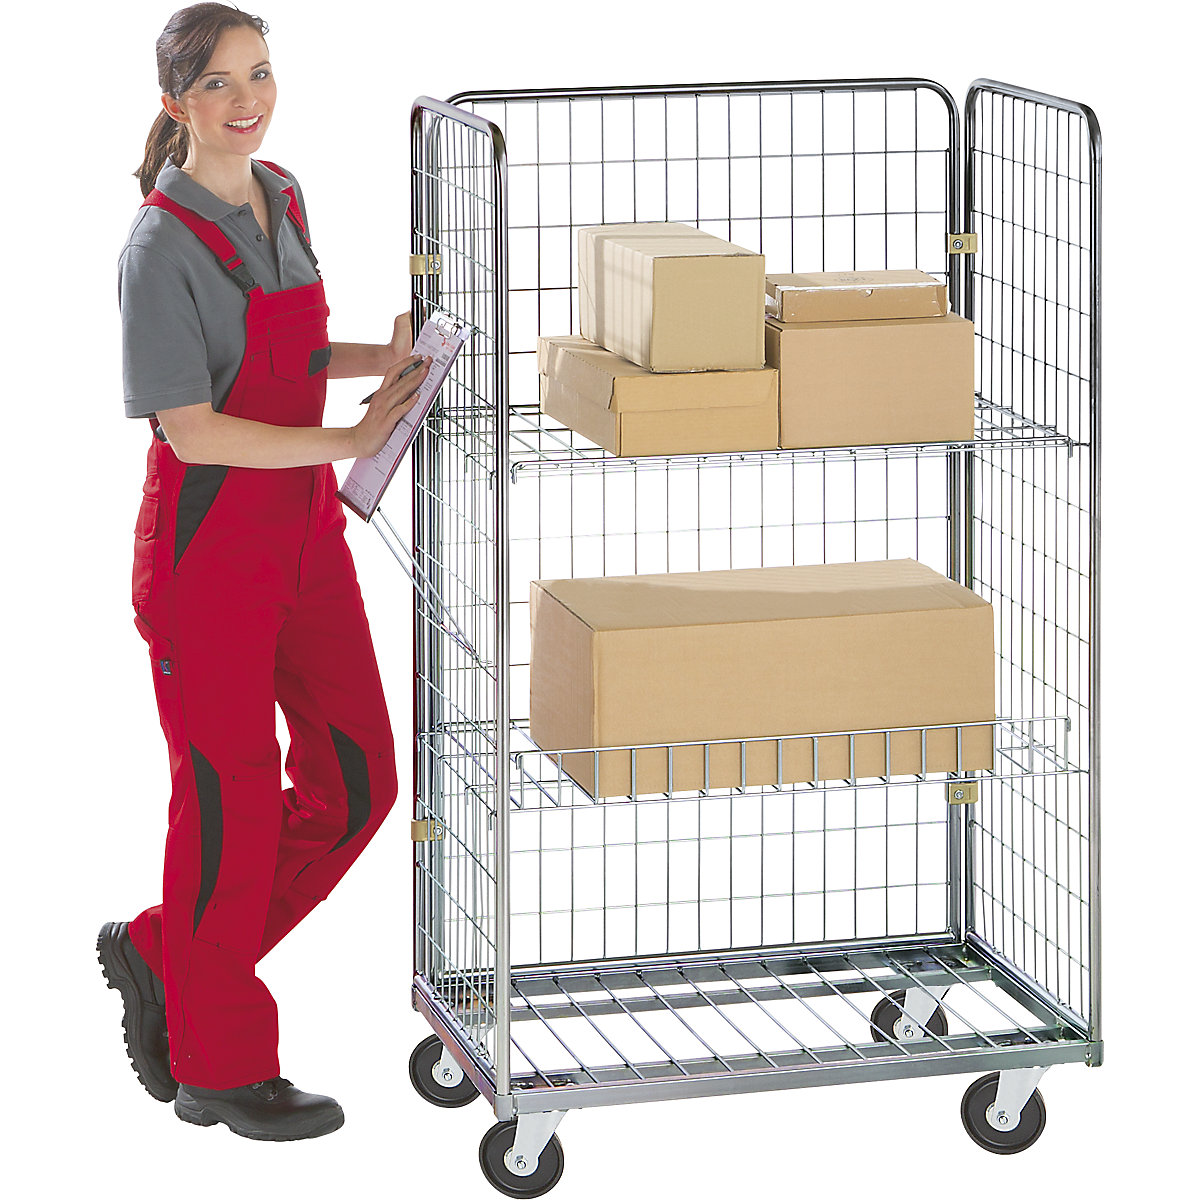 Roll containers, order picking trolley, WxD 900 x 600 mm, height 1585 mm, wheel Ø 100 mm, 10+ items-5